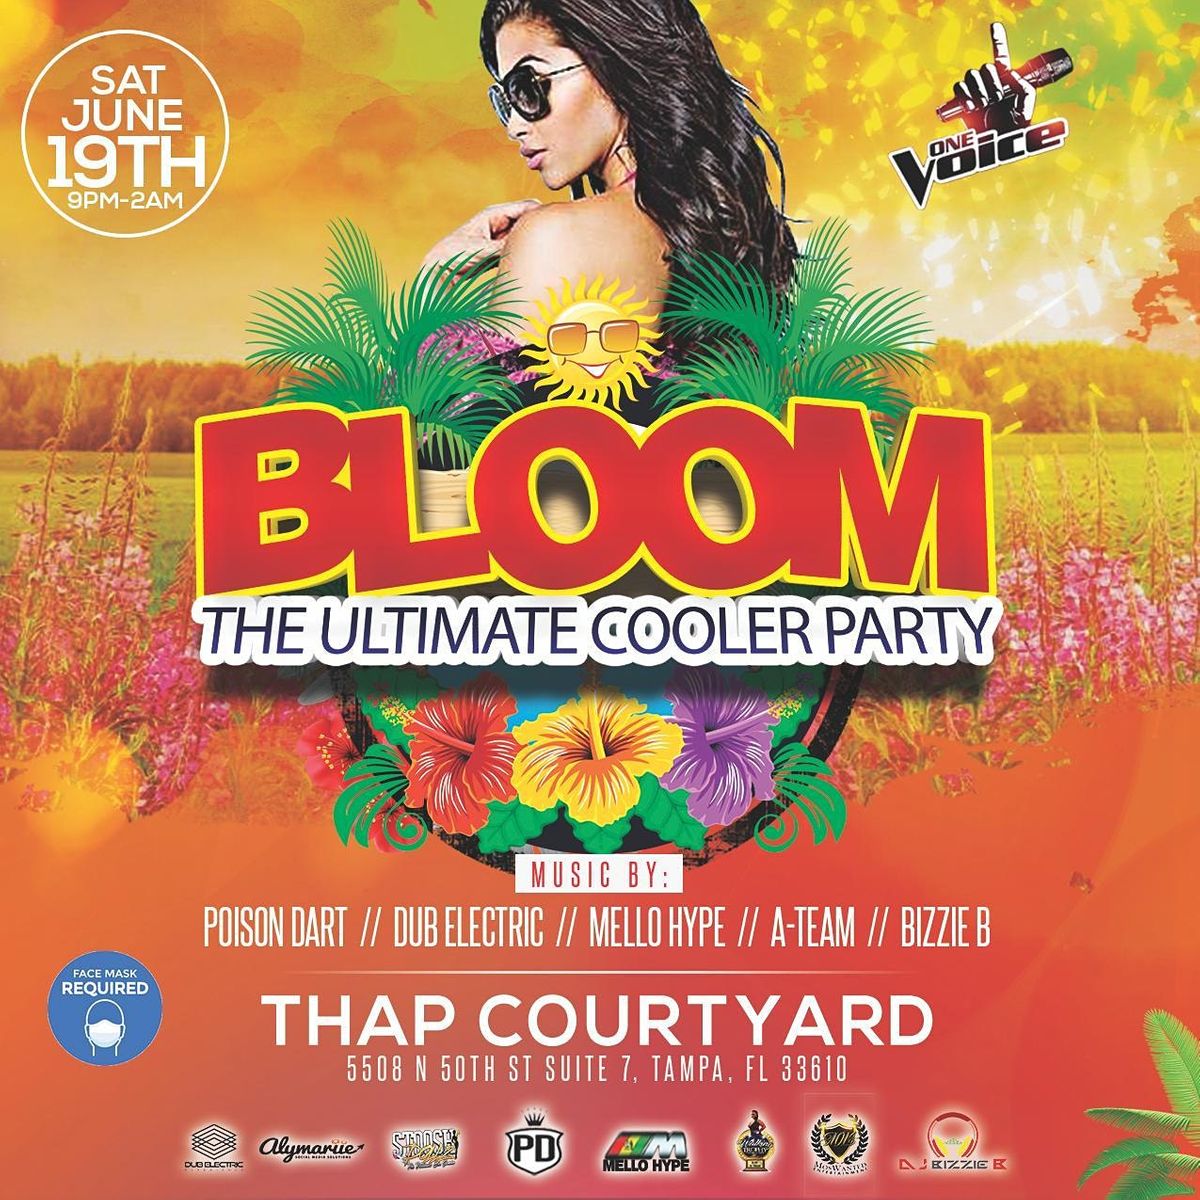 "BLOOM" COOLER PARTY